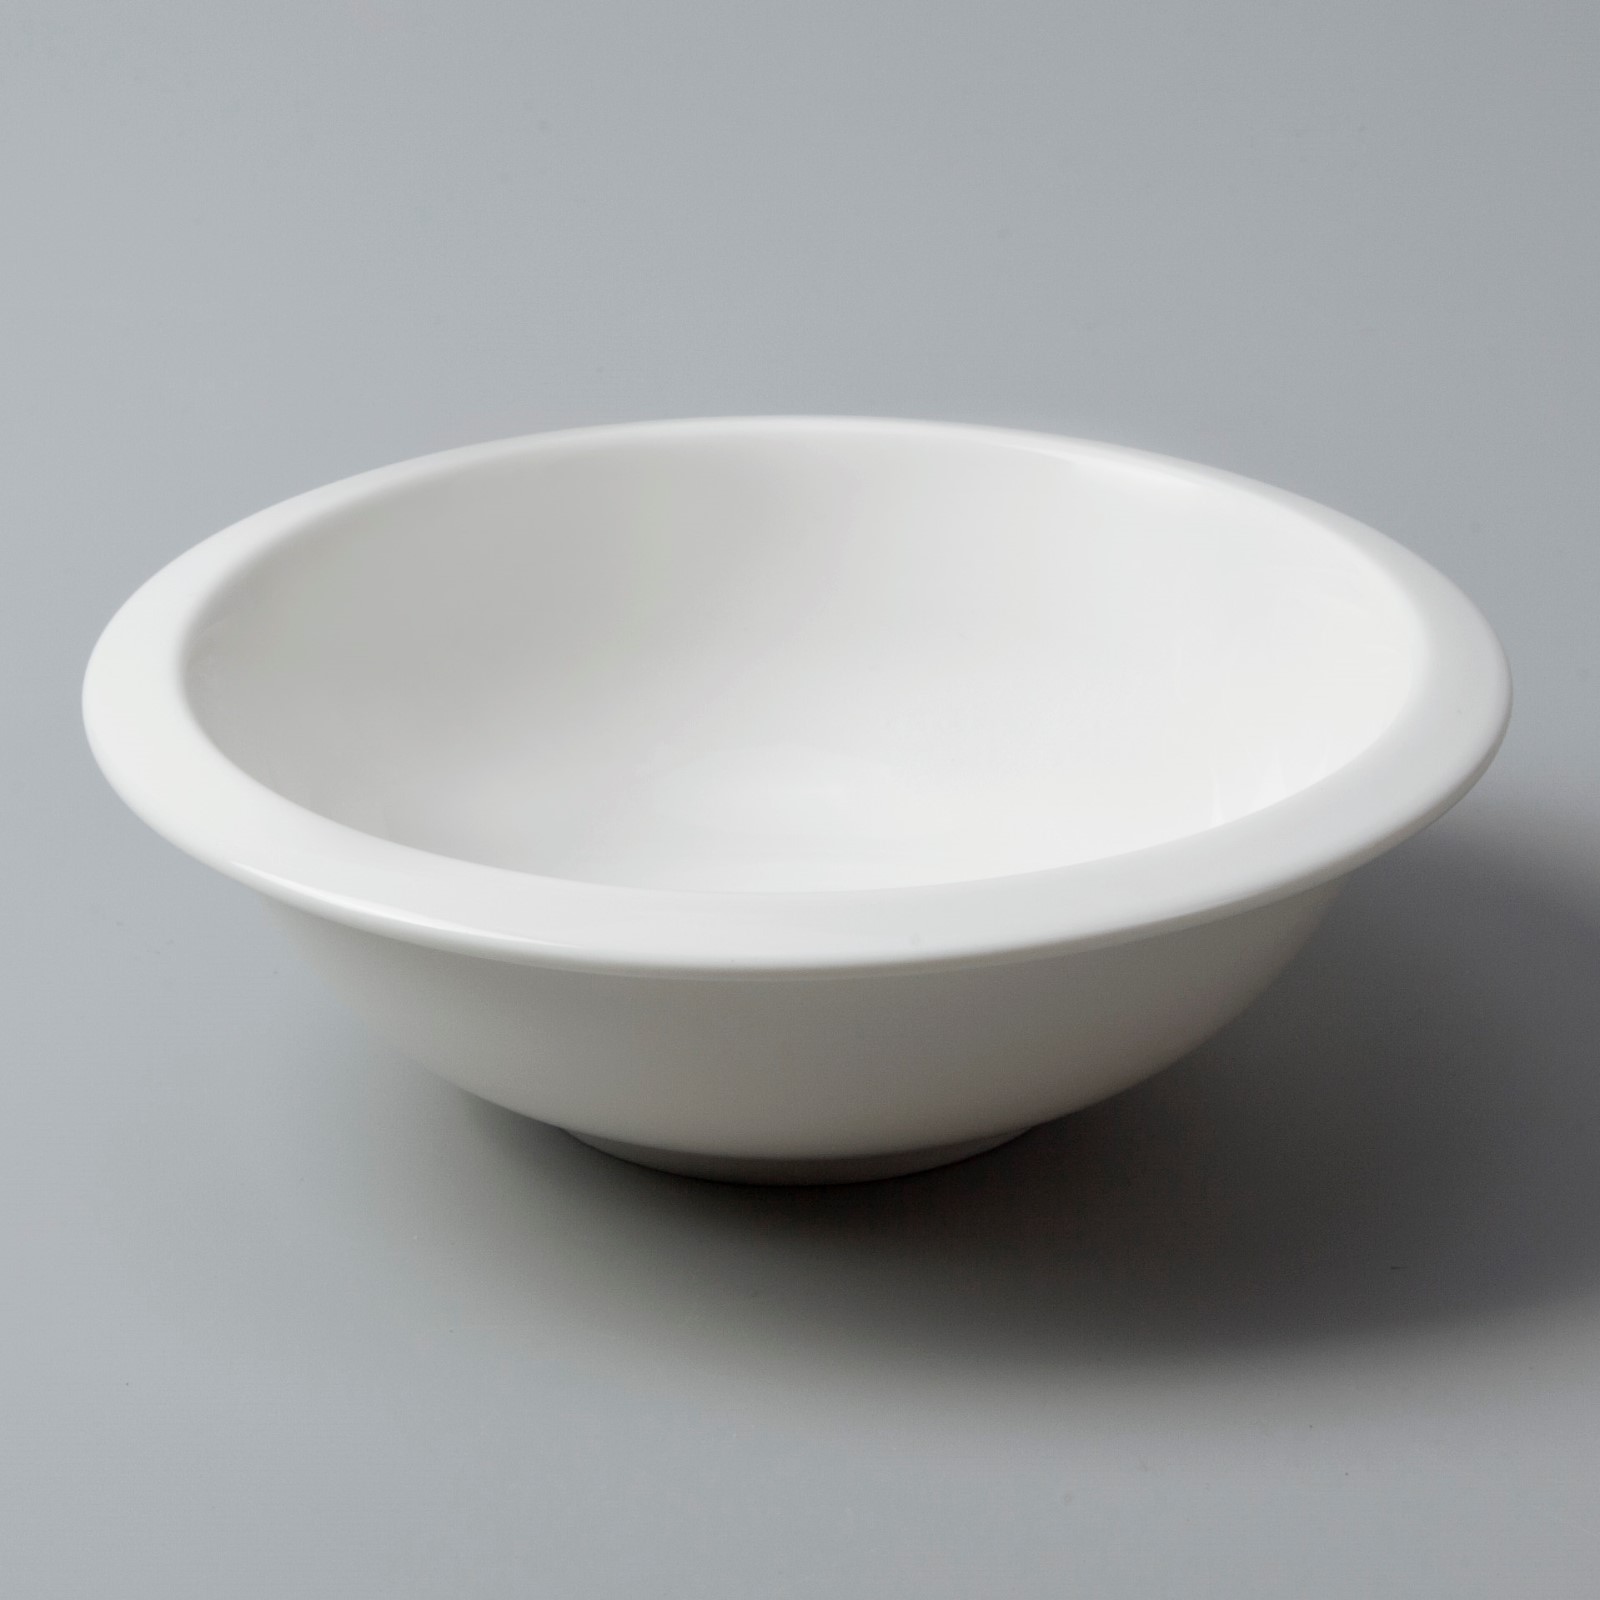 Two Eight best porcelain dinnerware in the world for business for bistro-11